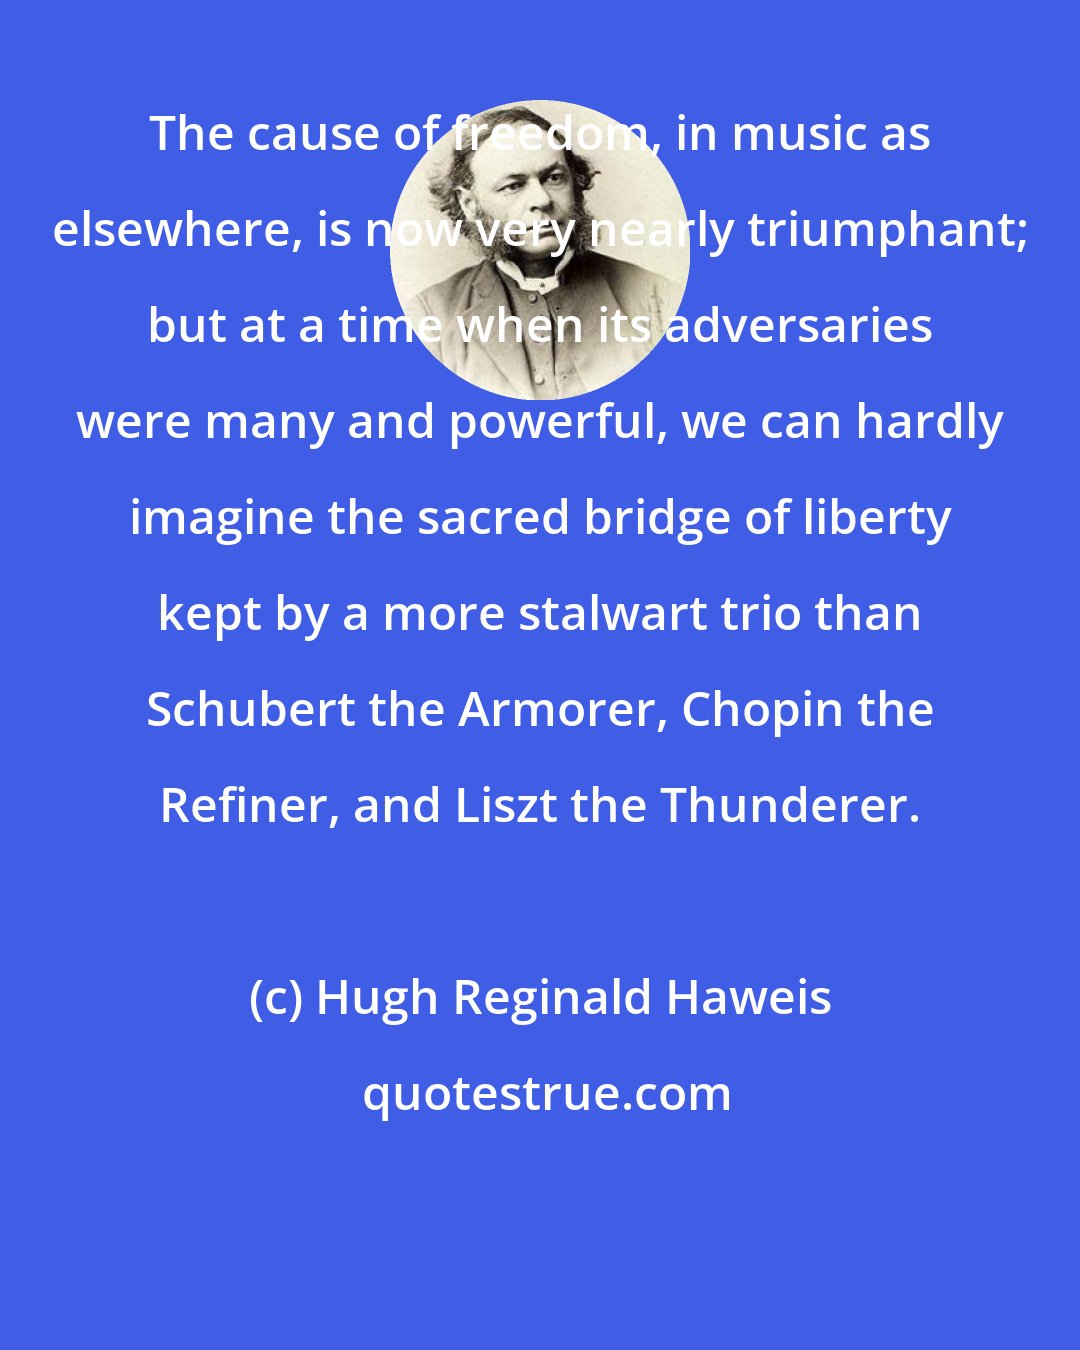 Hugh Reginald Haweis: The cause of freedom, in music as elsewhere, is now very nearly triumphant; but at a time when its adversaries were many and powerful, we can hardly imagine the sacred bridge of liberty kept by a more stalwart trio than Schubert the Armorer, Chopin the Refiner, and Liszt the Thunderer.